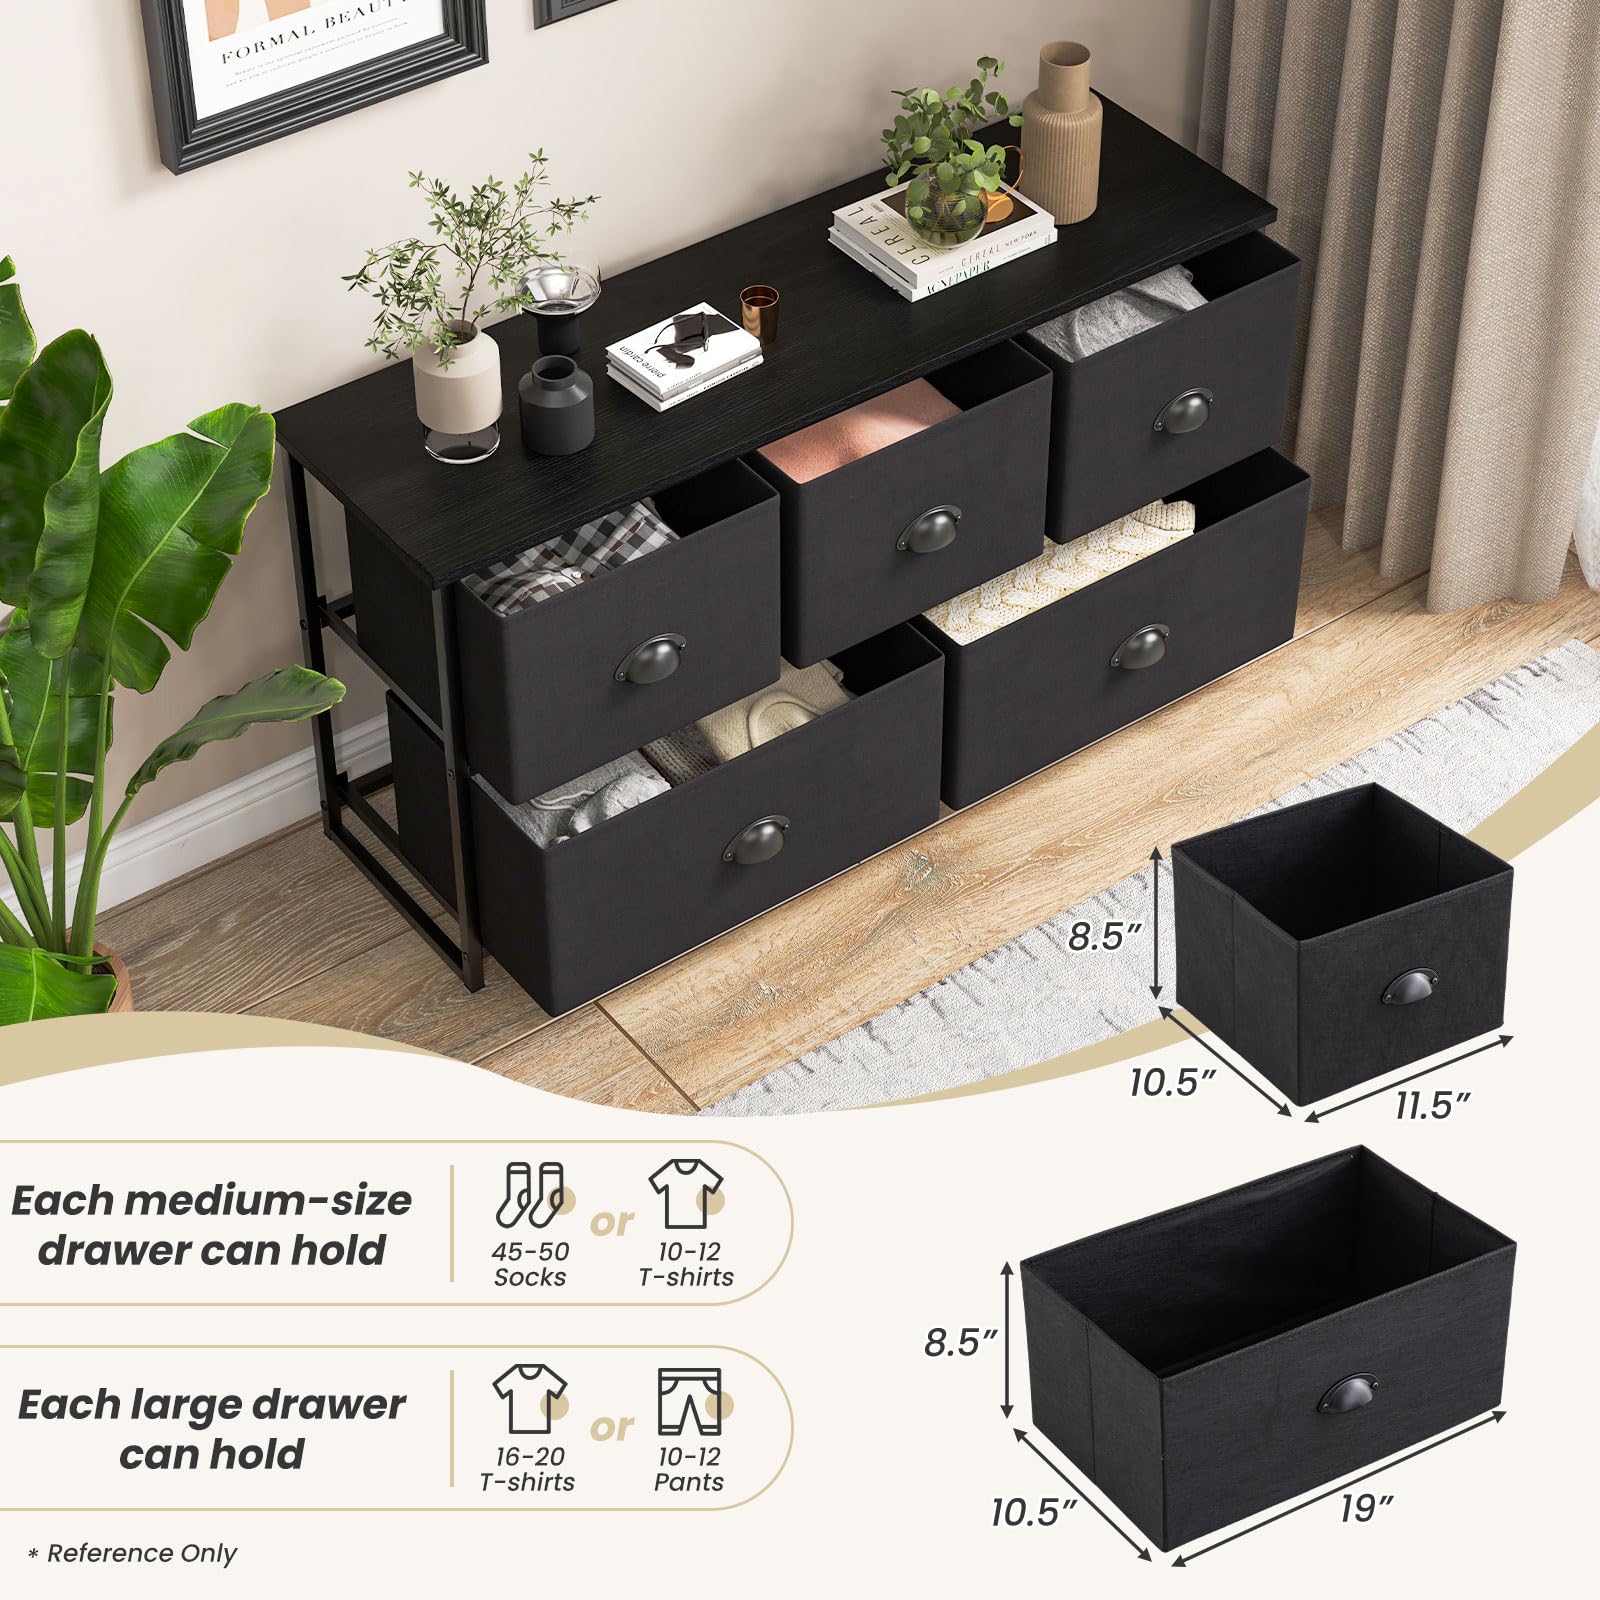 Giantex Black Dresser for Bedroom with 5 Drawers - Wide Clothes Storage Organizer w/ 5 Fabric Bins